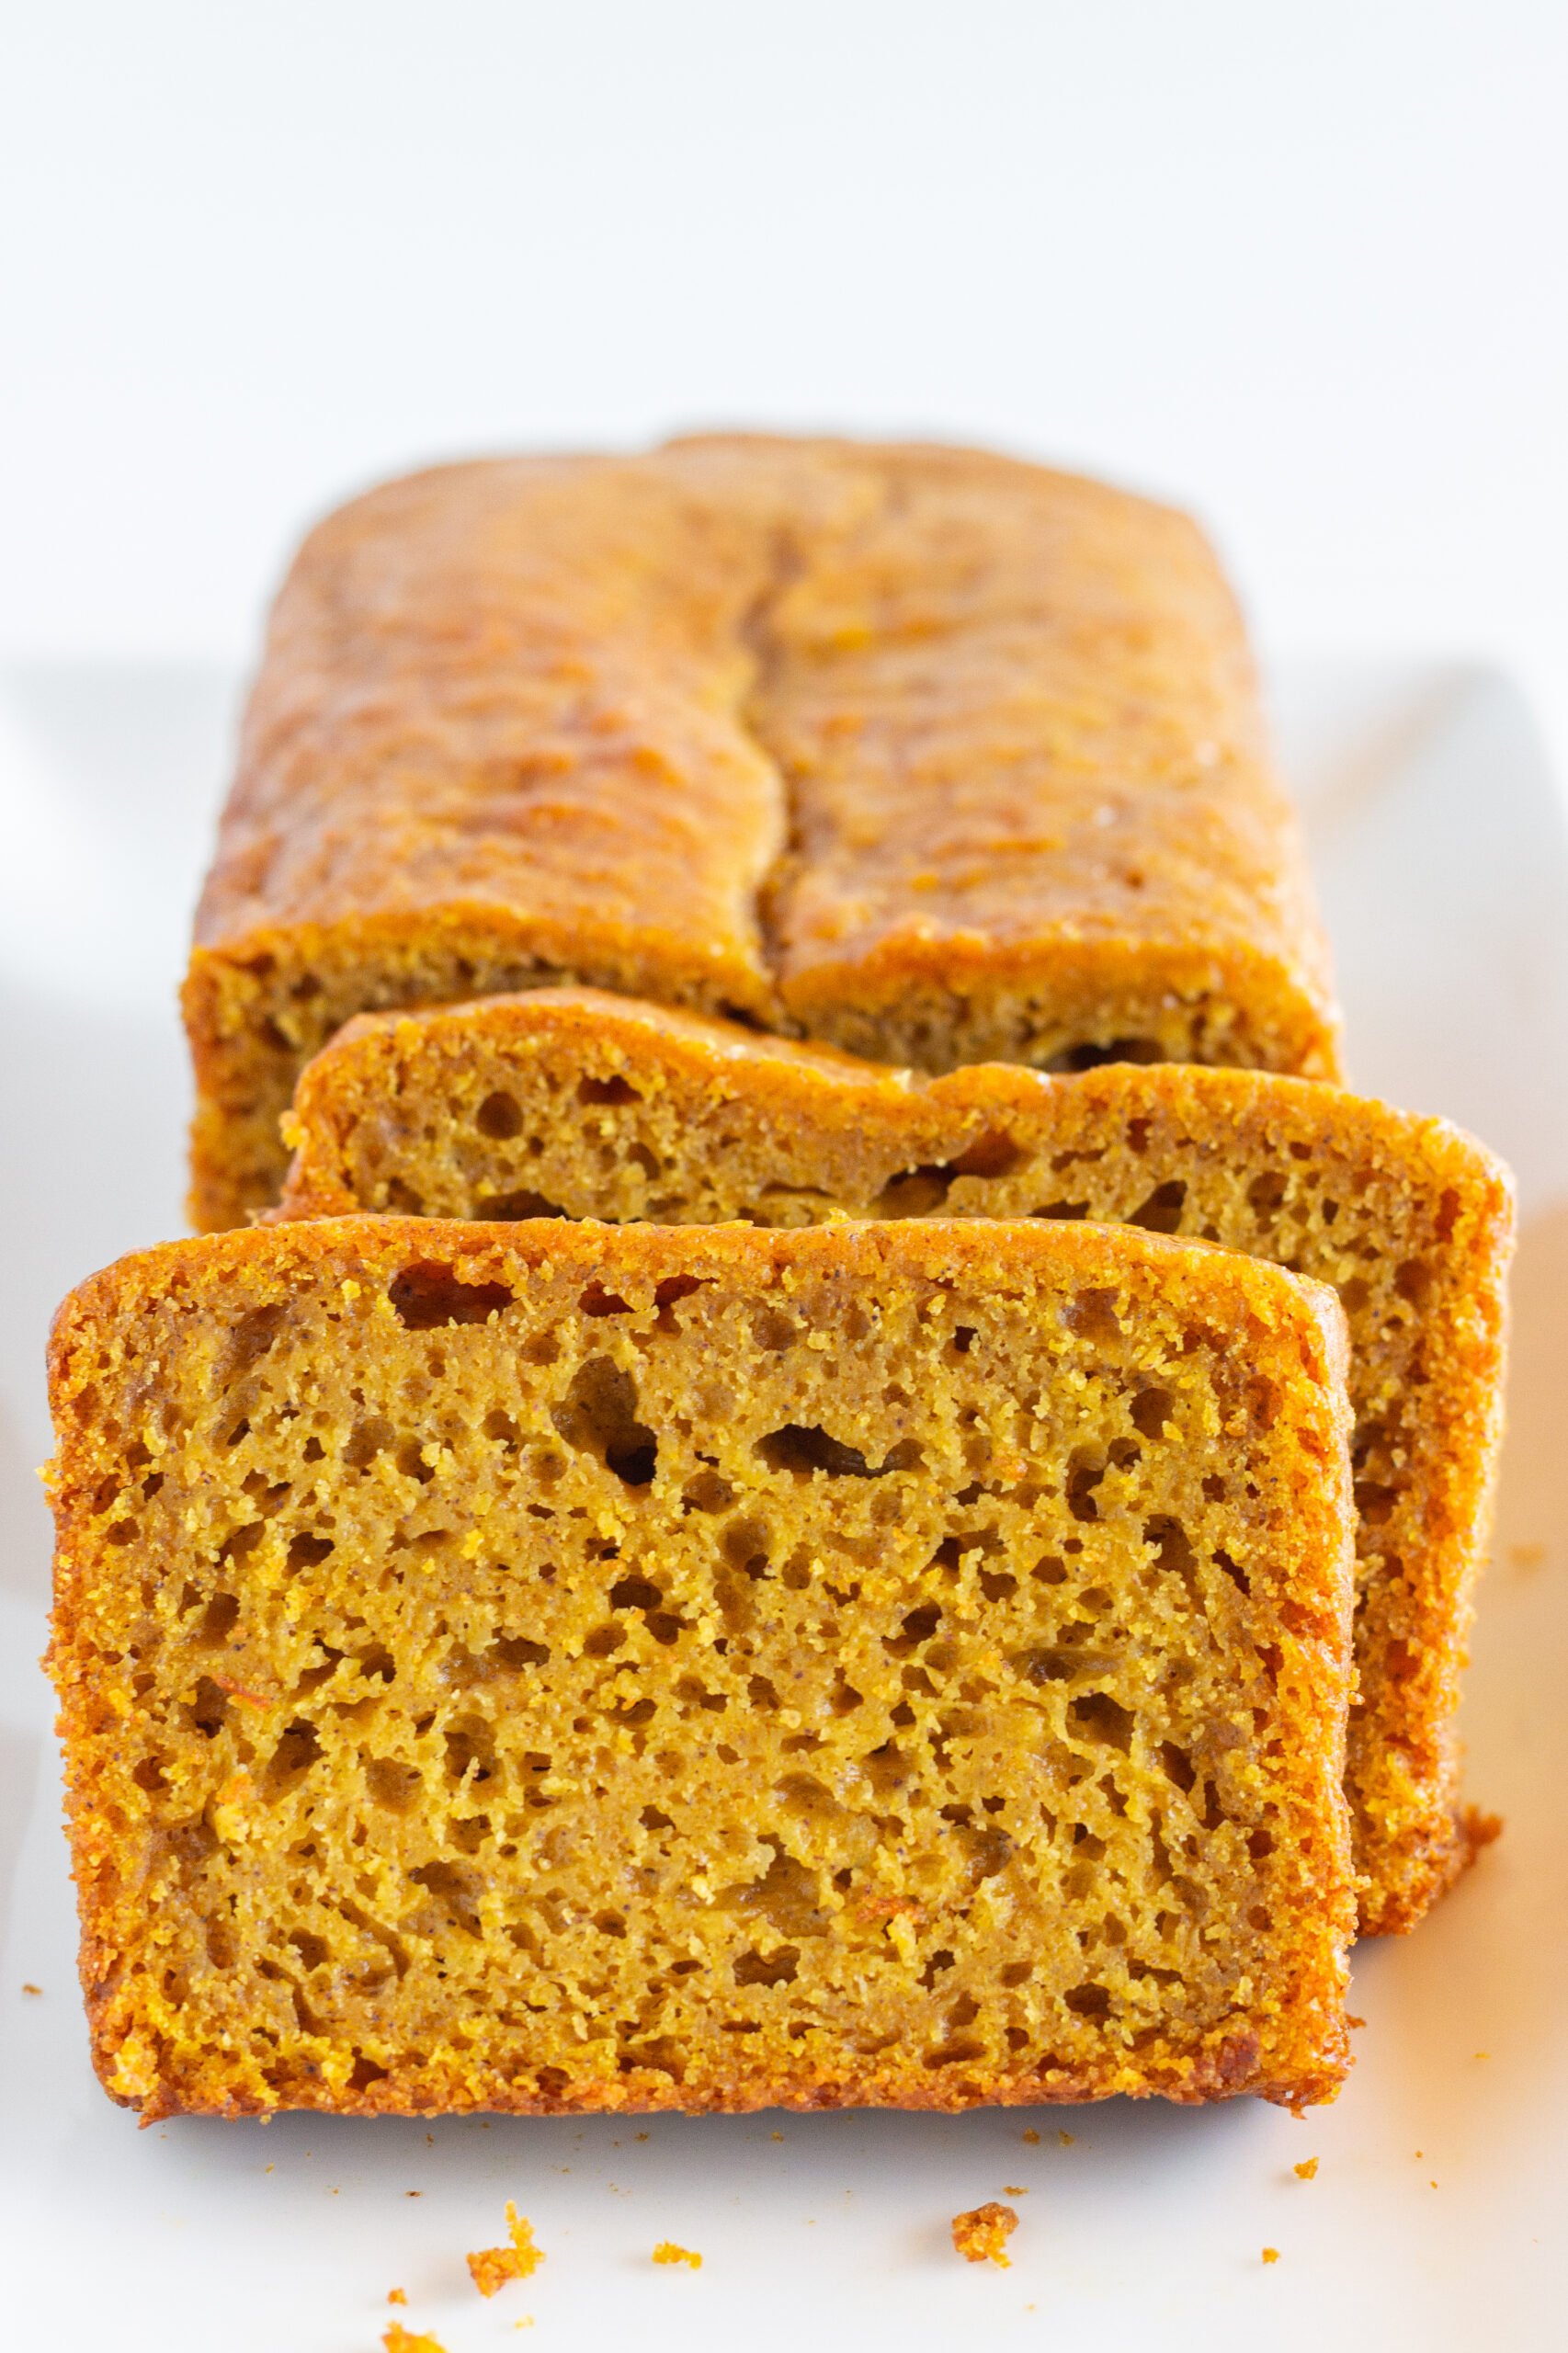 Pumpkin Bread made with a cake mix and sliced on a white plate.